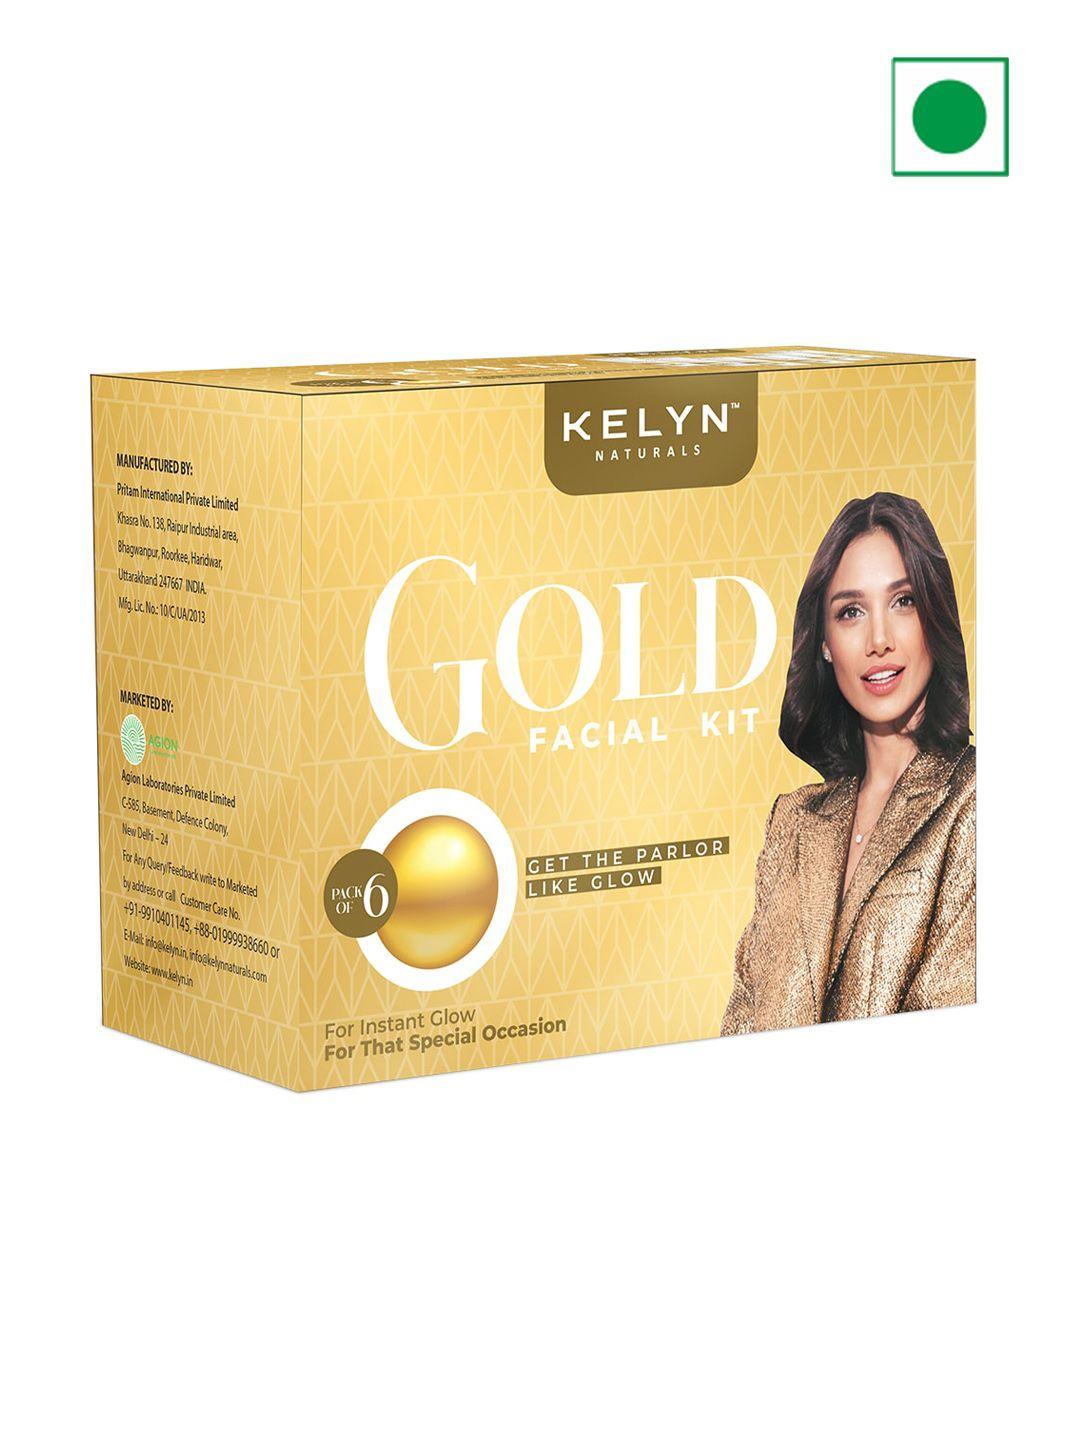 kelyn gold facial kit for instant glow - 10g each